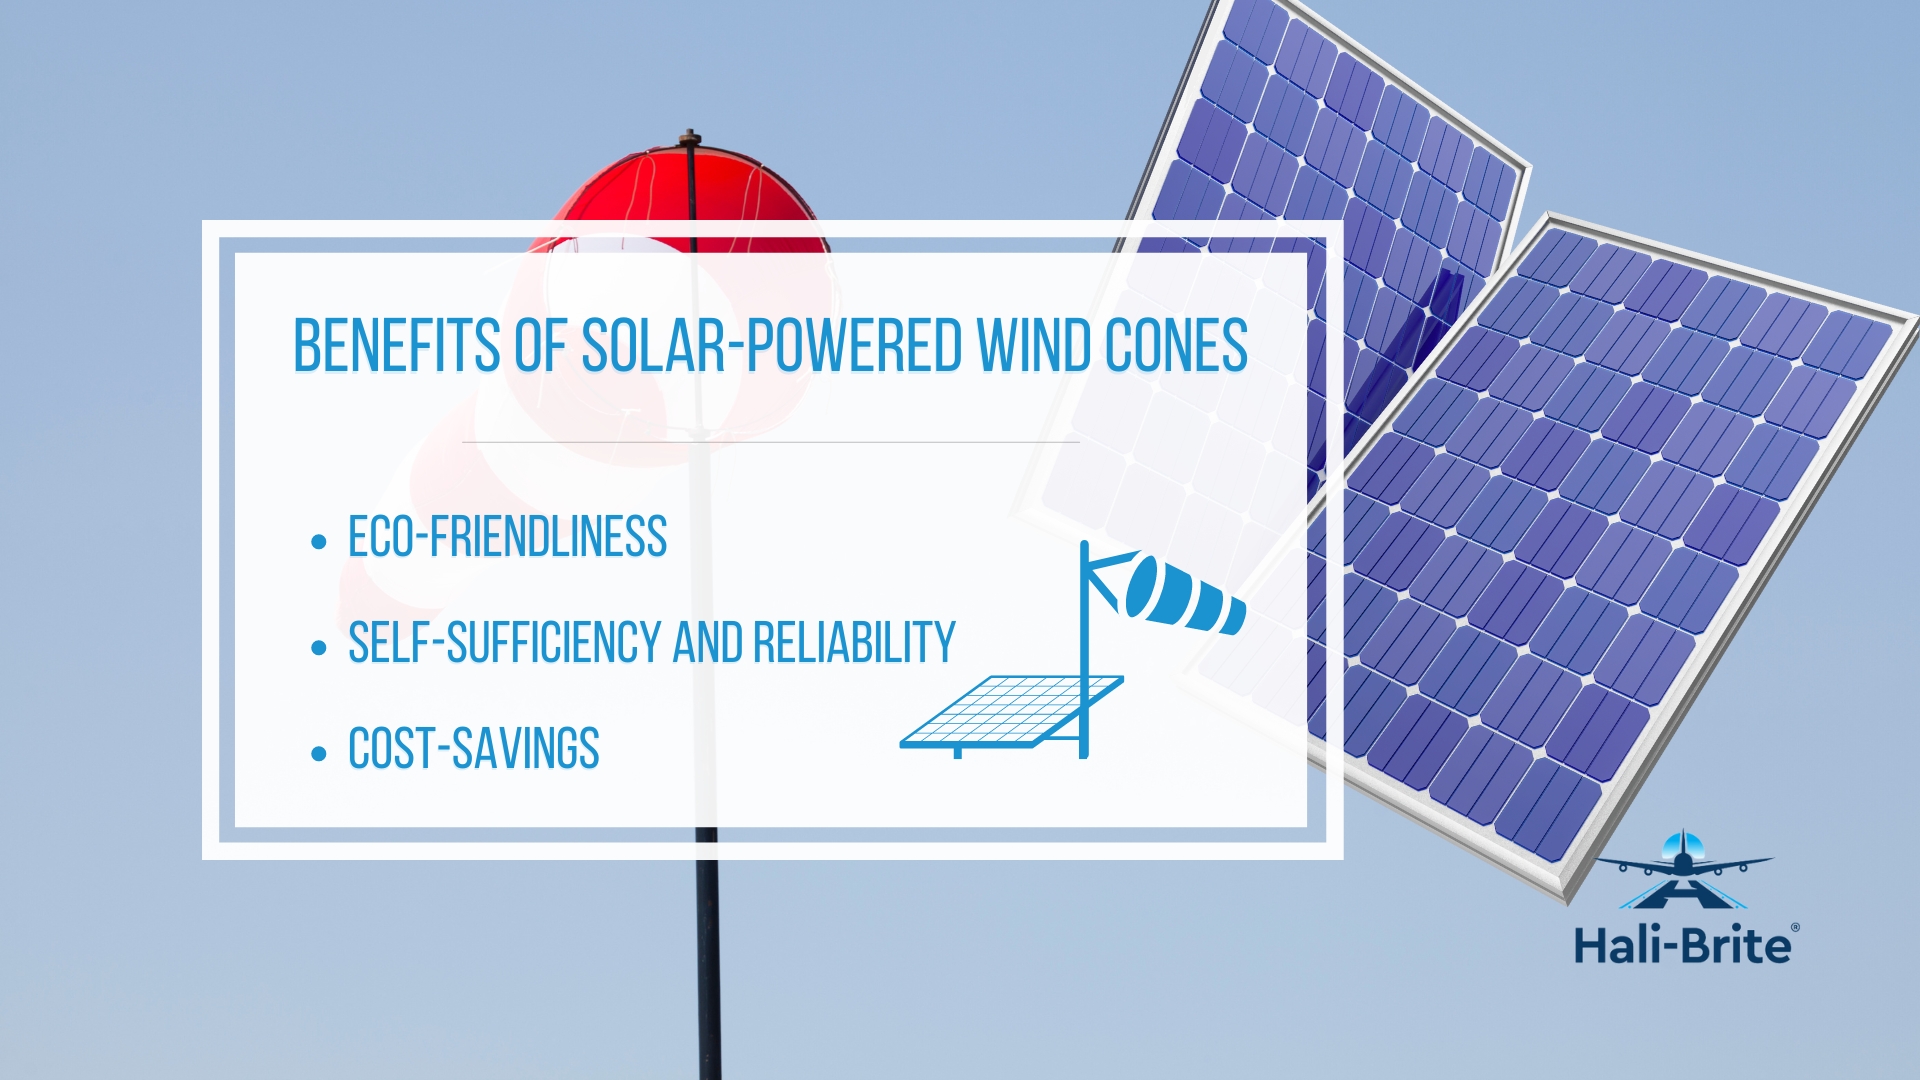 Infographic image of benefits of solar-powered wind cones